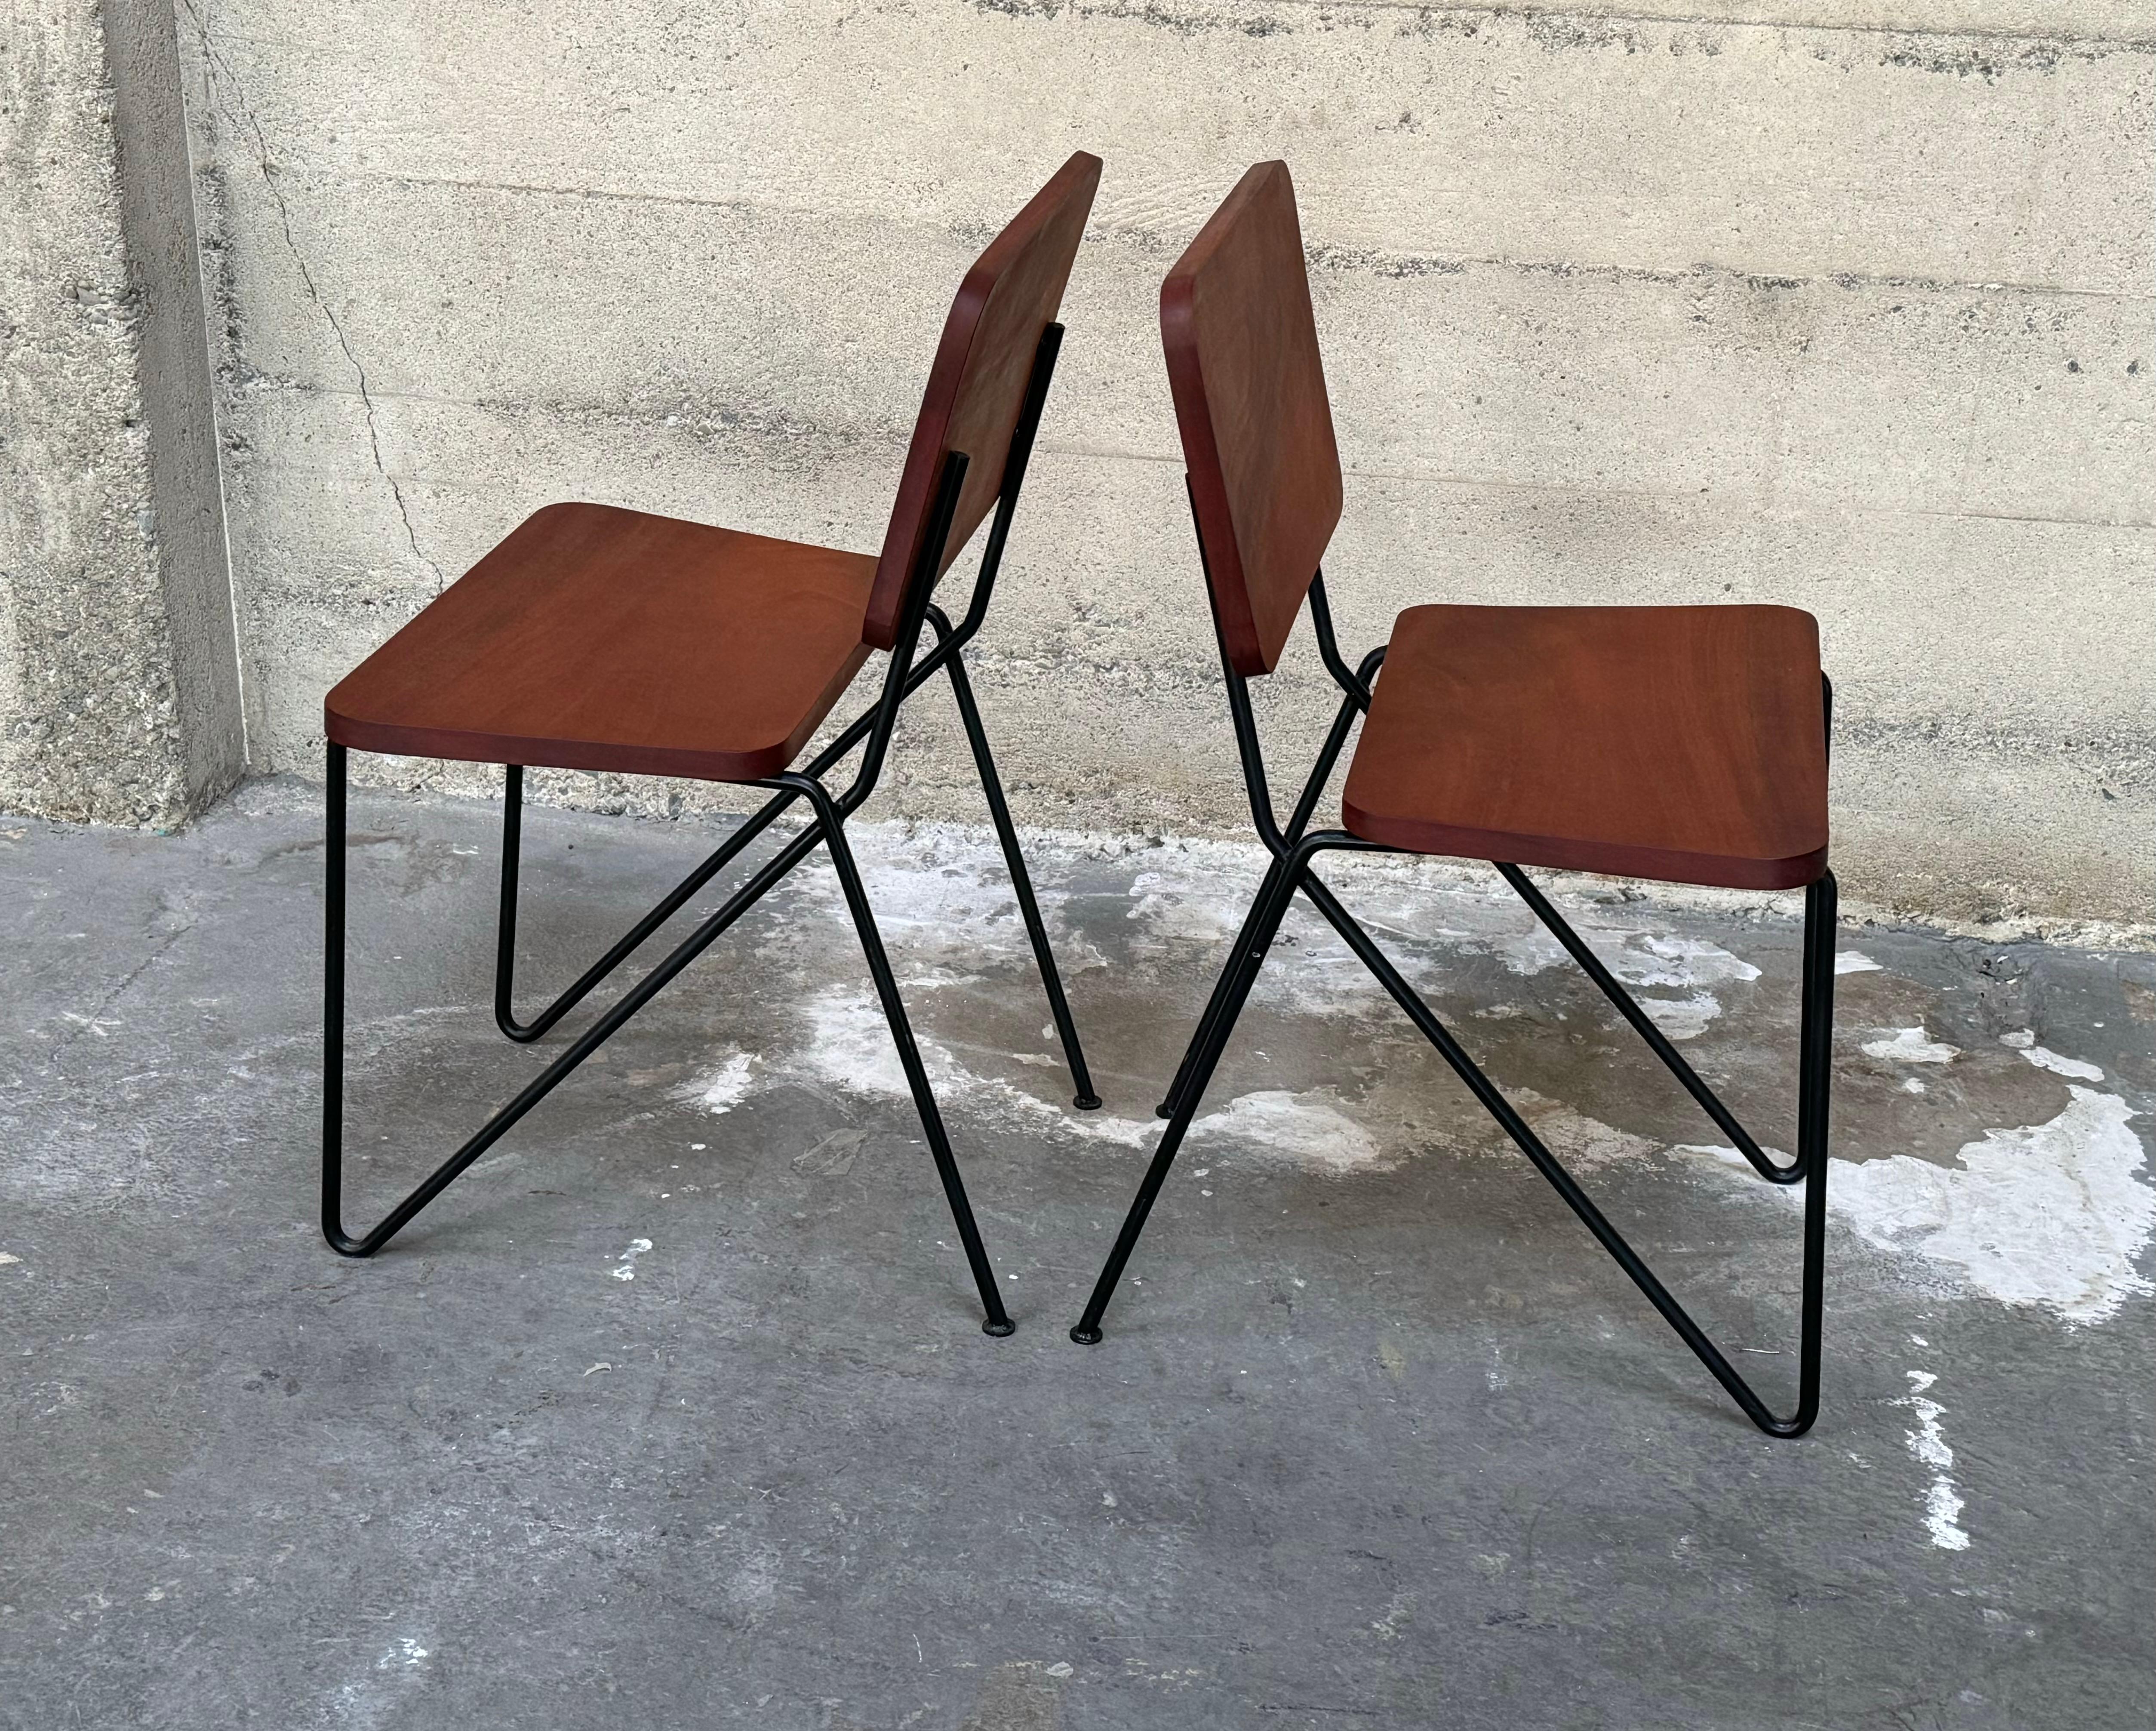 Pair of 1950s California Design Iron and Tropical Hardwood Side Chairs For Sale 4